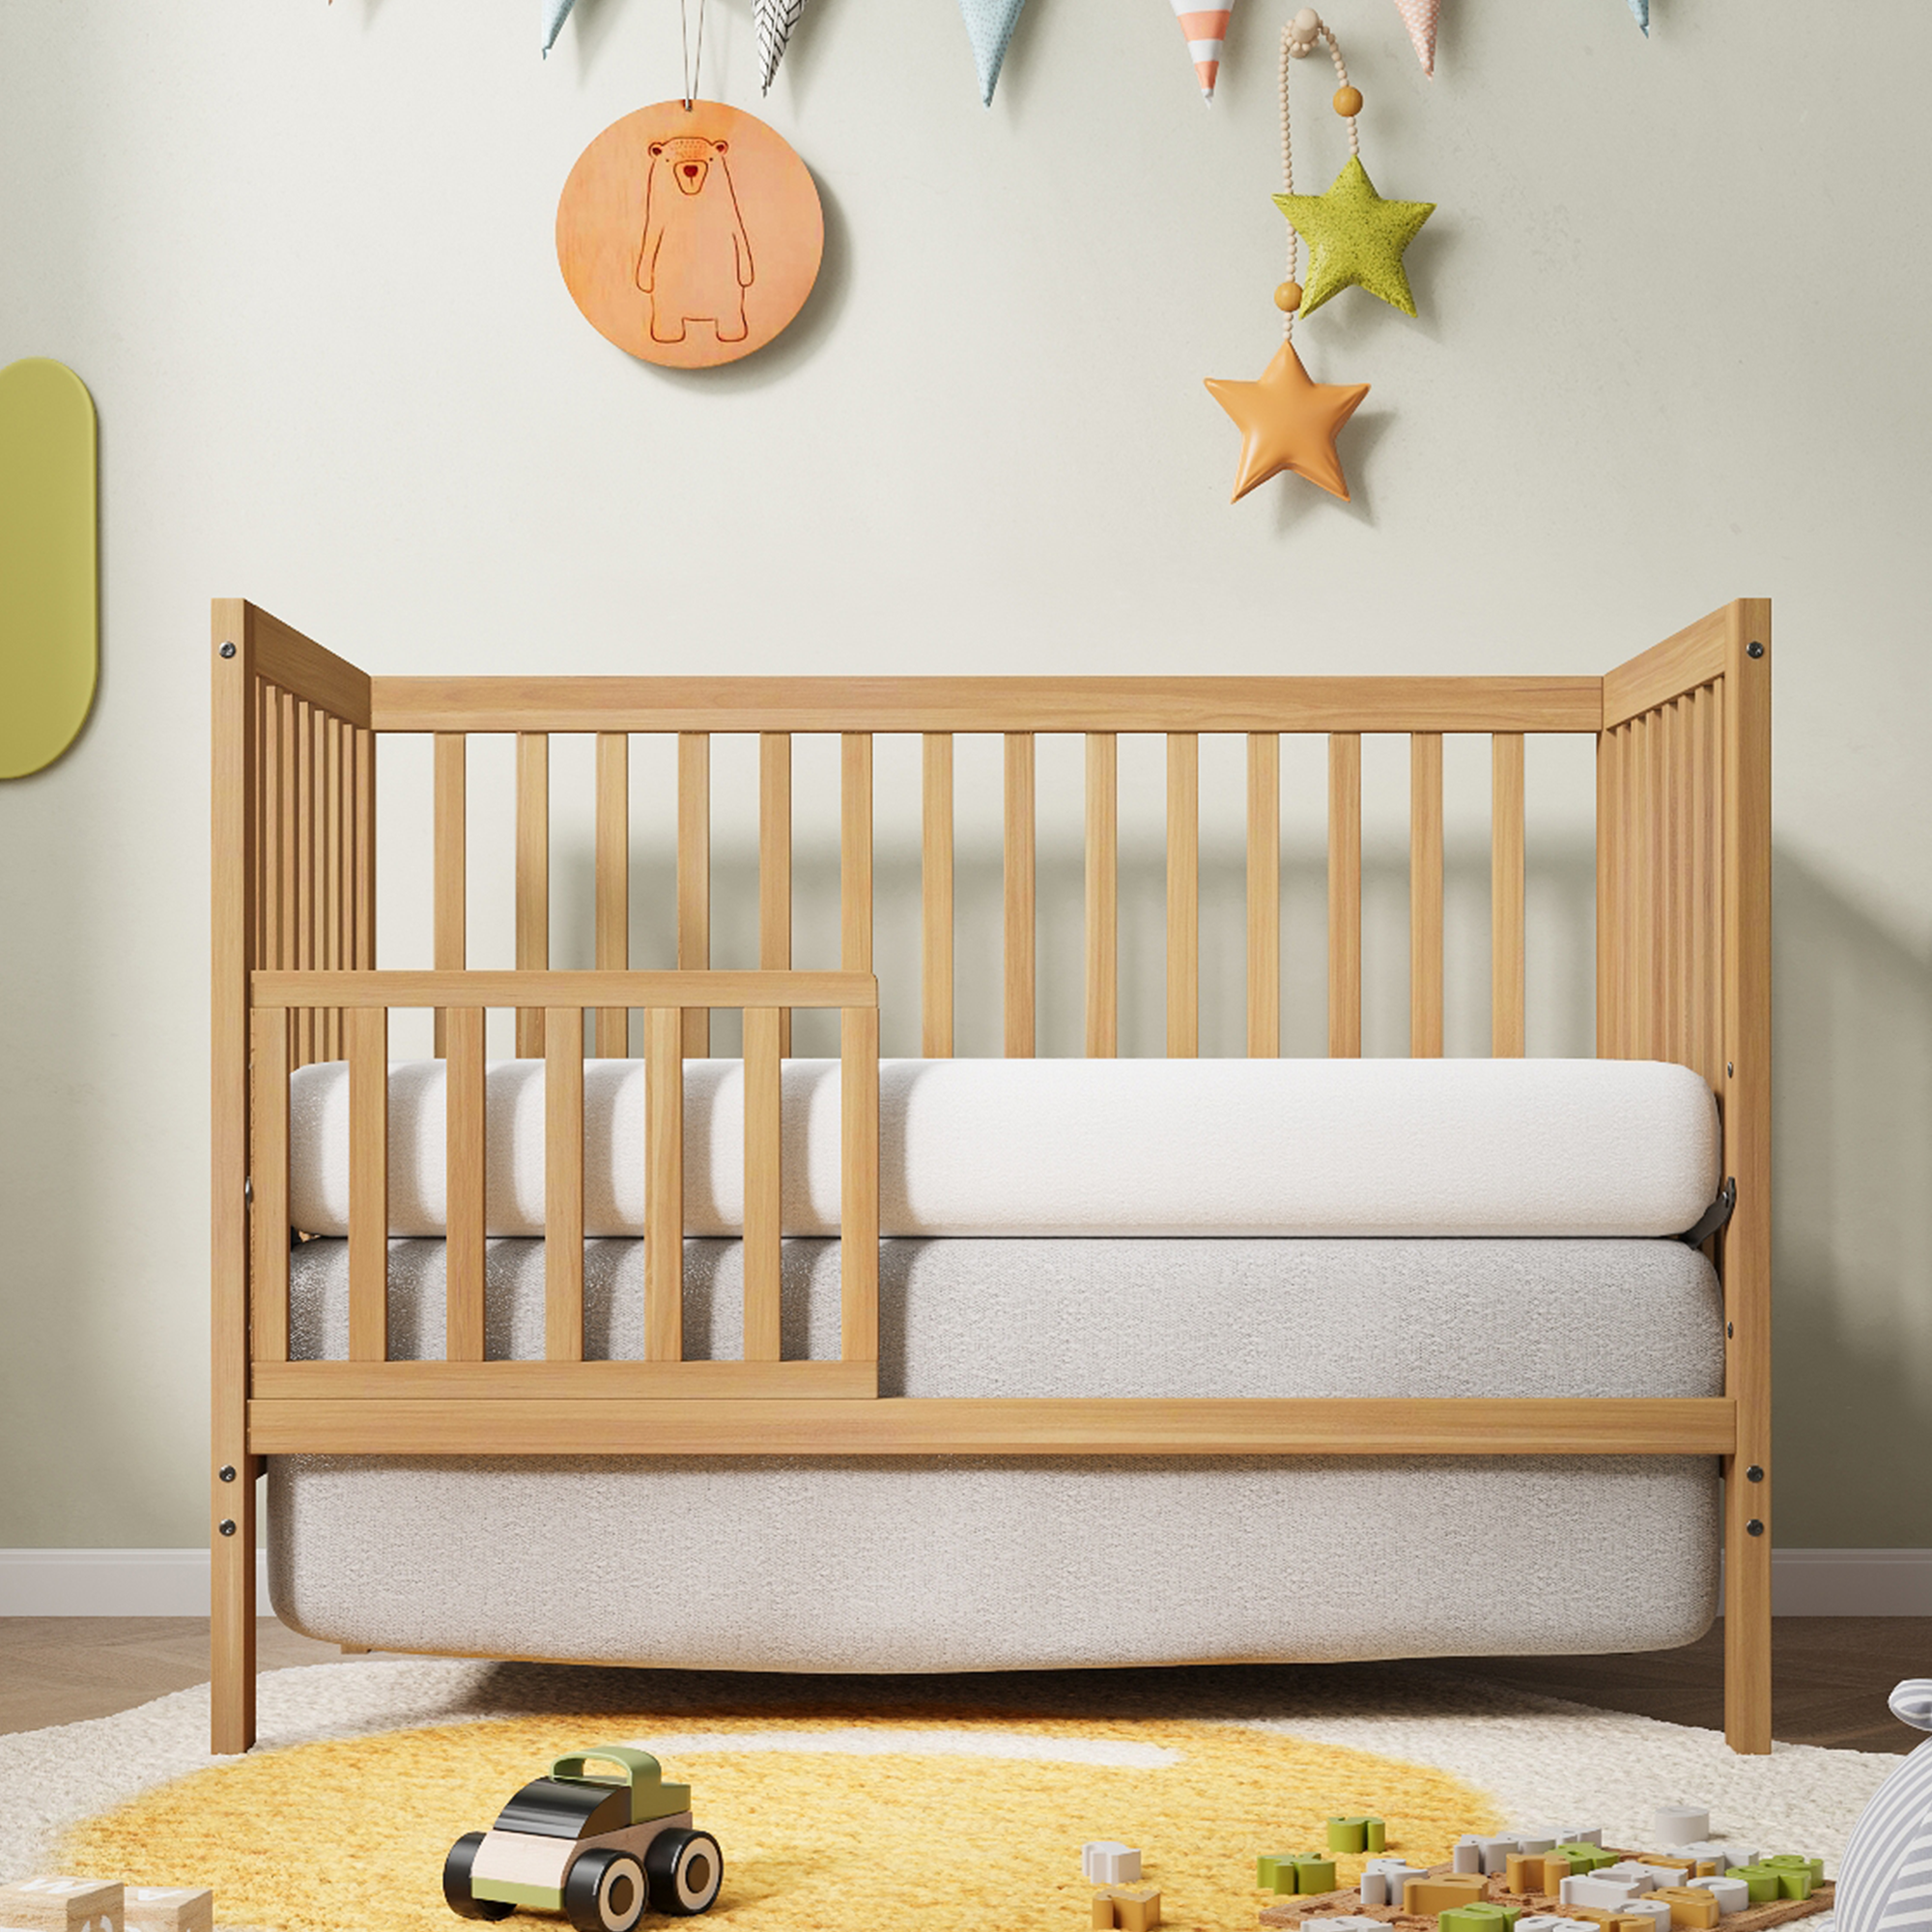 Sesslife 5-In-1 Convertible Crib, Baby Bed, Converts from Baby Crib to Toddler Bed, Fits Standard Full-Size Crib Mattress ,Easy to Assemble(Natural) - image 3 of 9